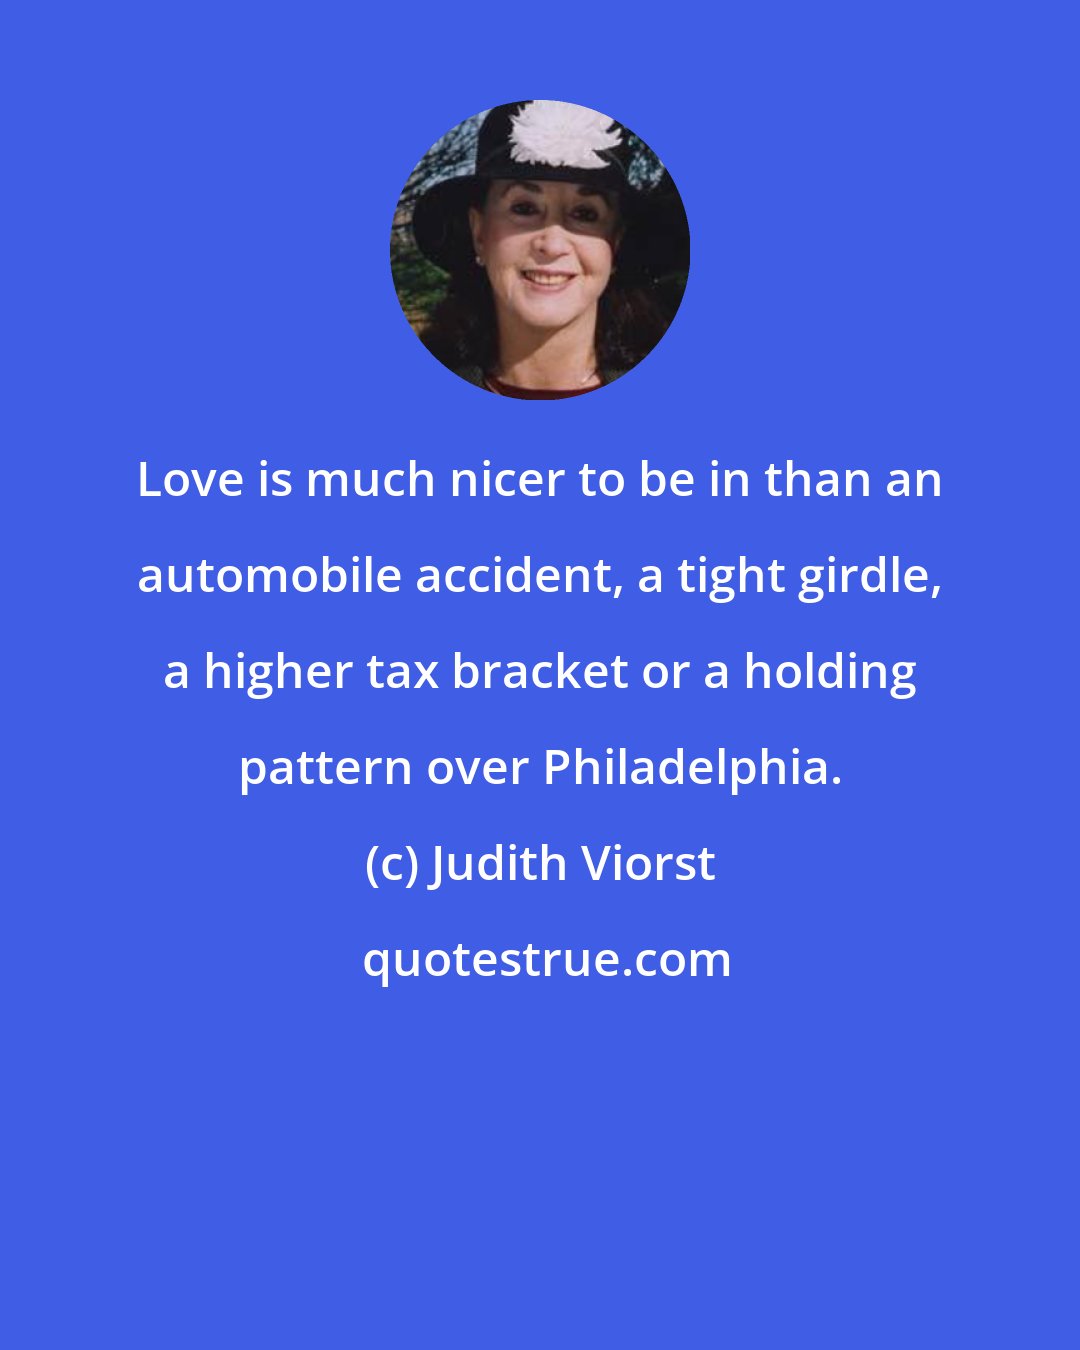 Judith Viorst: Love is much nicer to be in than an automobile accident, a tight girdle, a higher tax bracket or a holding pattern over Philadelphia.